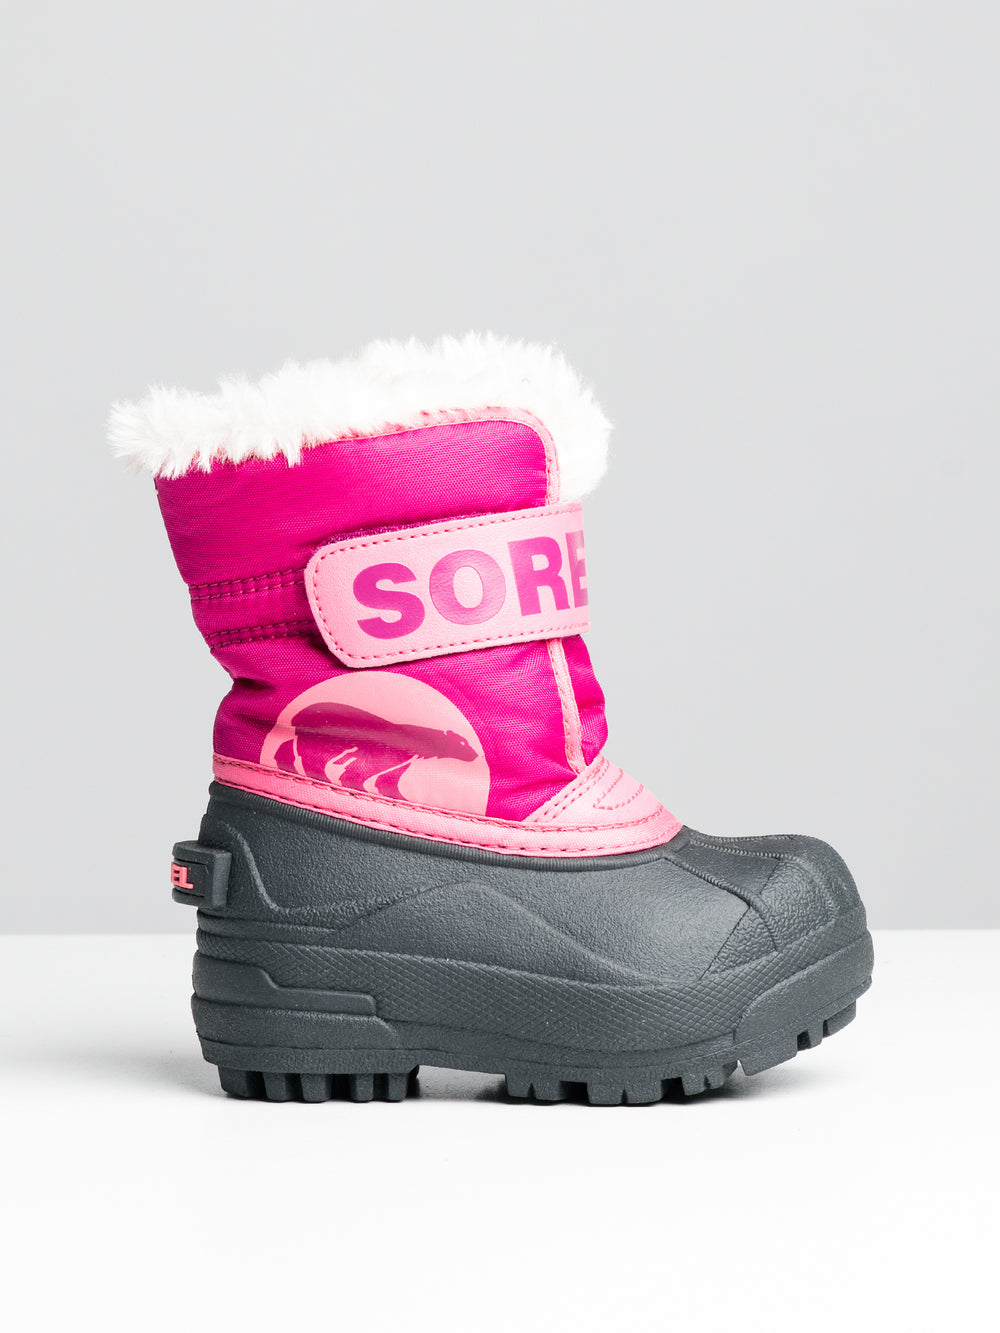 KIDS SNOW COMMANDER - TROPIC PINK - CLEARANCE